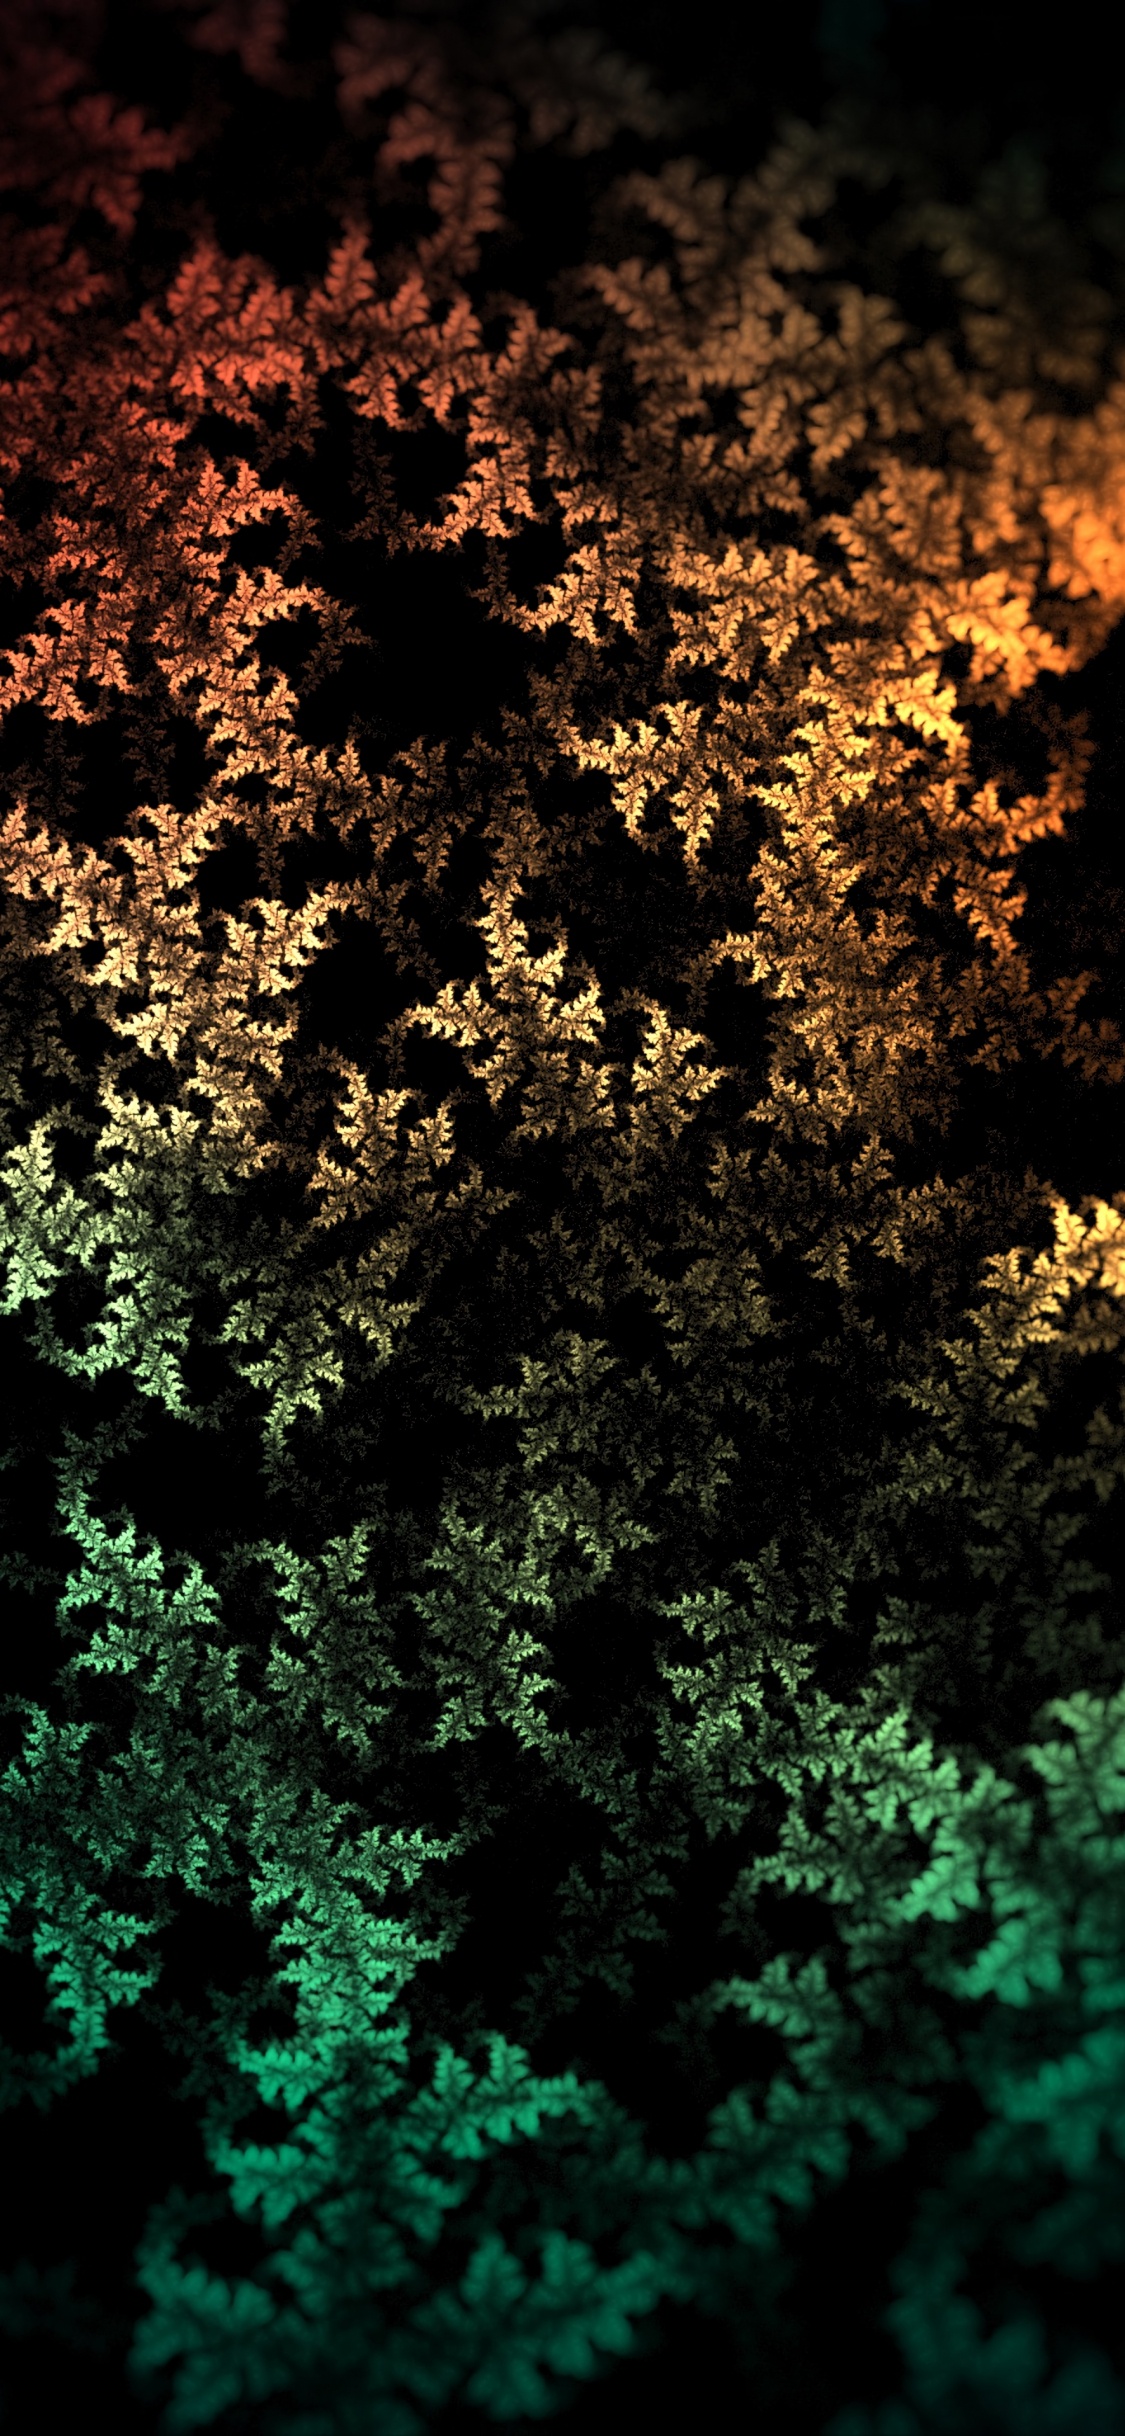 Green and Brown Leaf Plant. Wallpaper in 1125x2436 Resolution